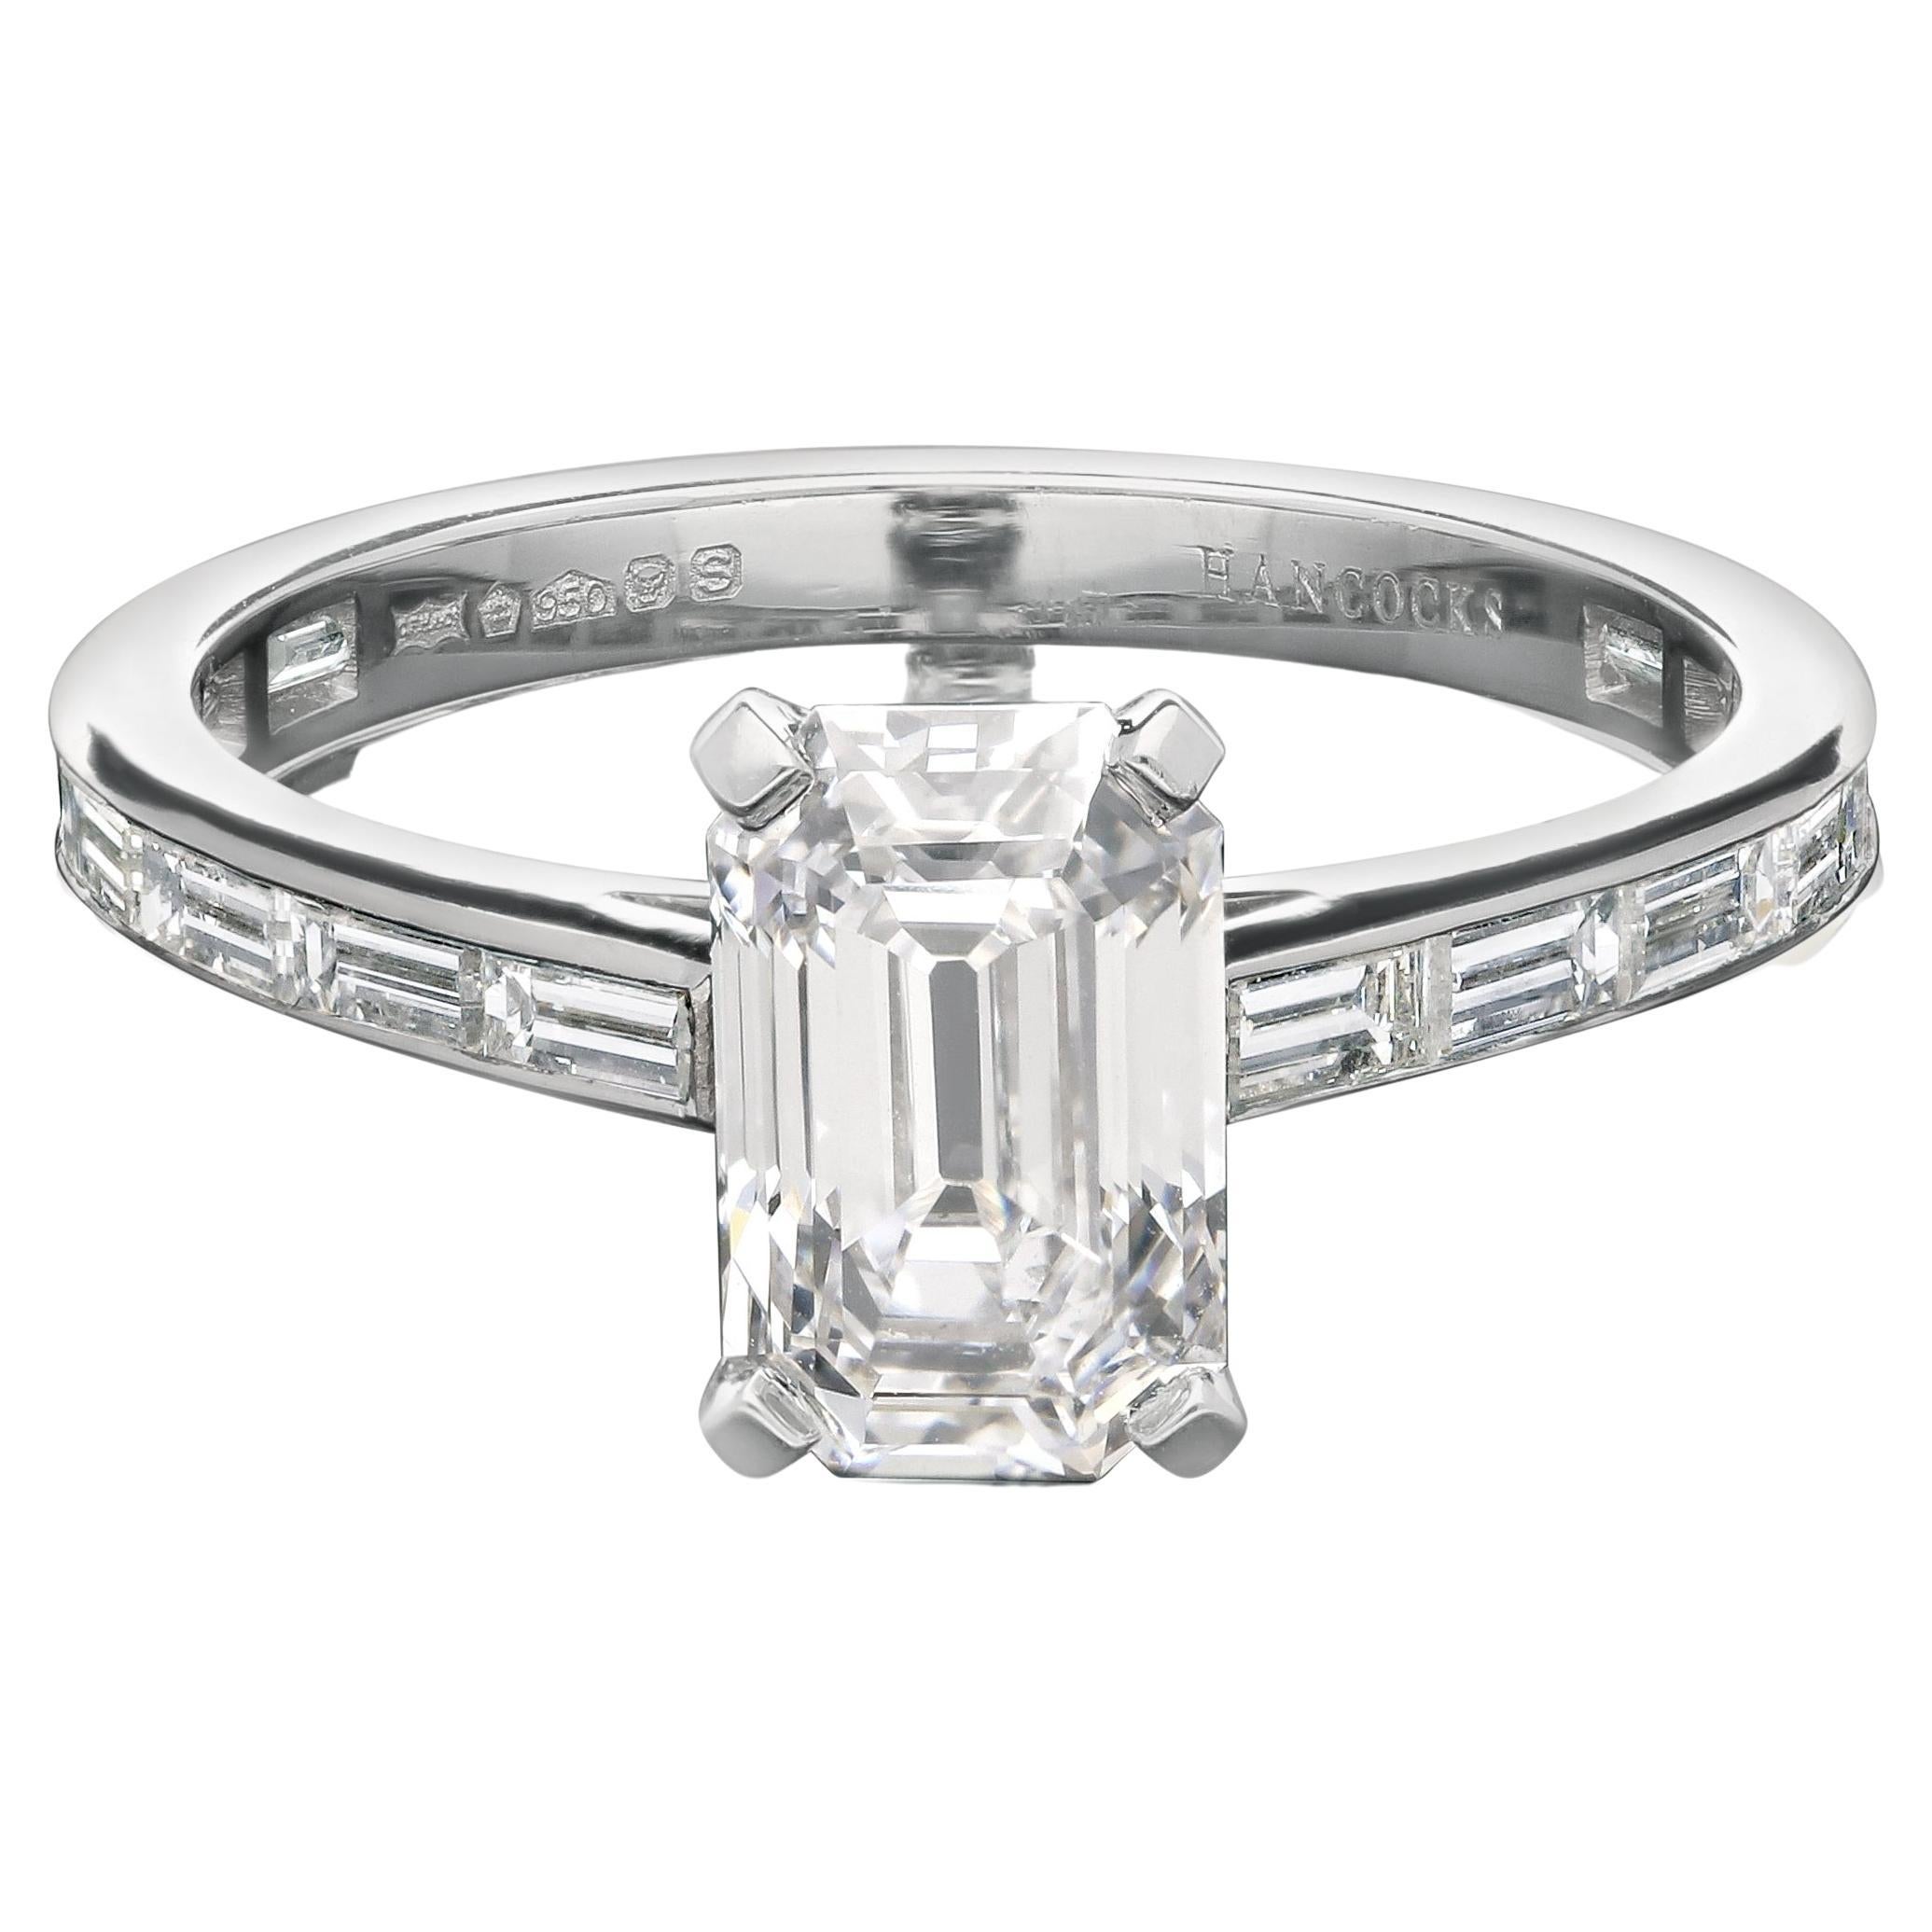 Hancocks 1.52ct Emerald-Cut Diamond Solitaire Ring With Baguette Diamond Band For Sale